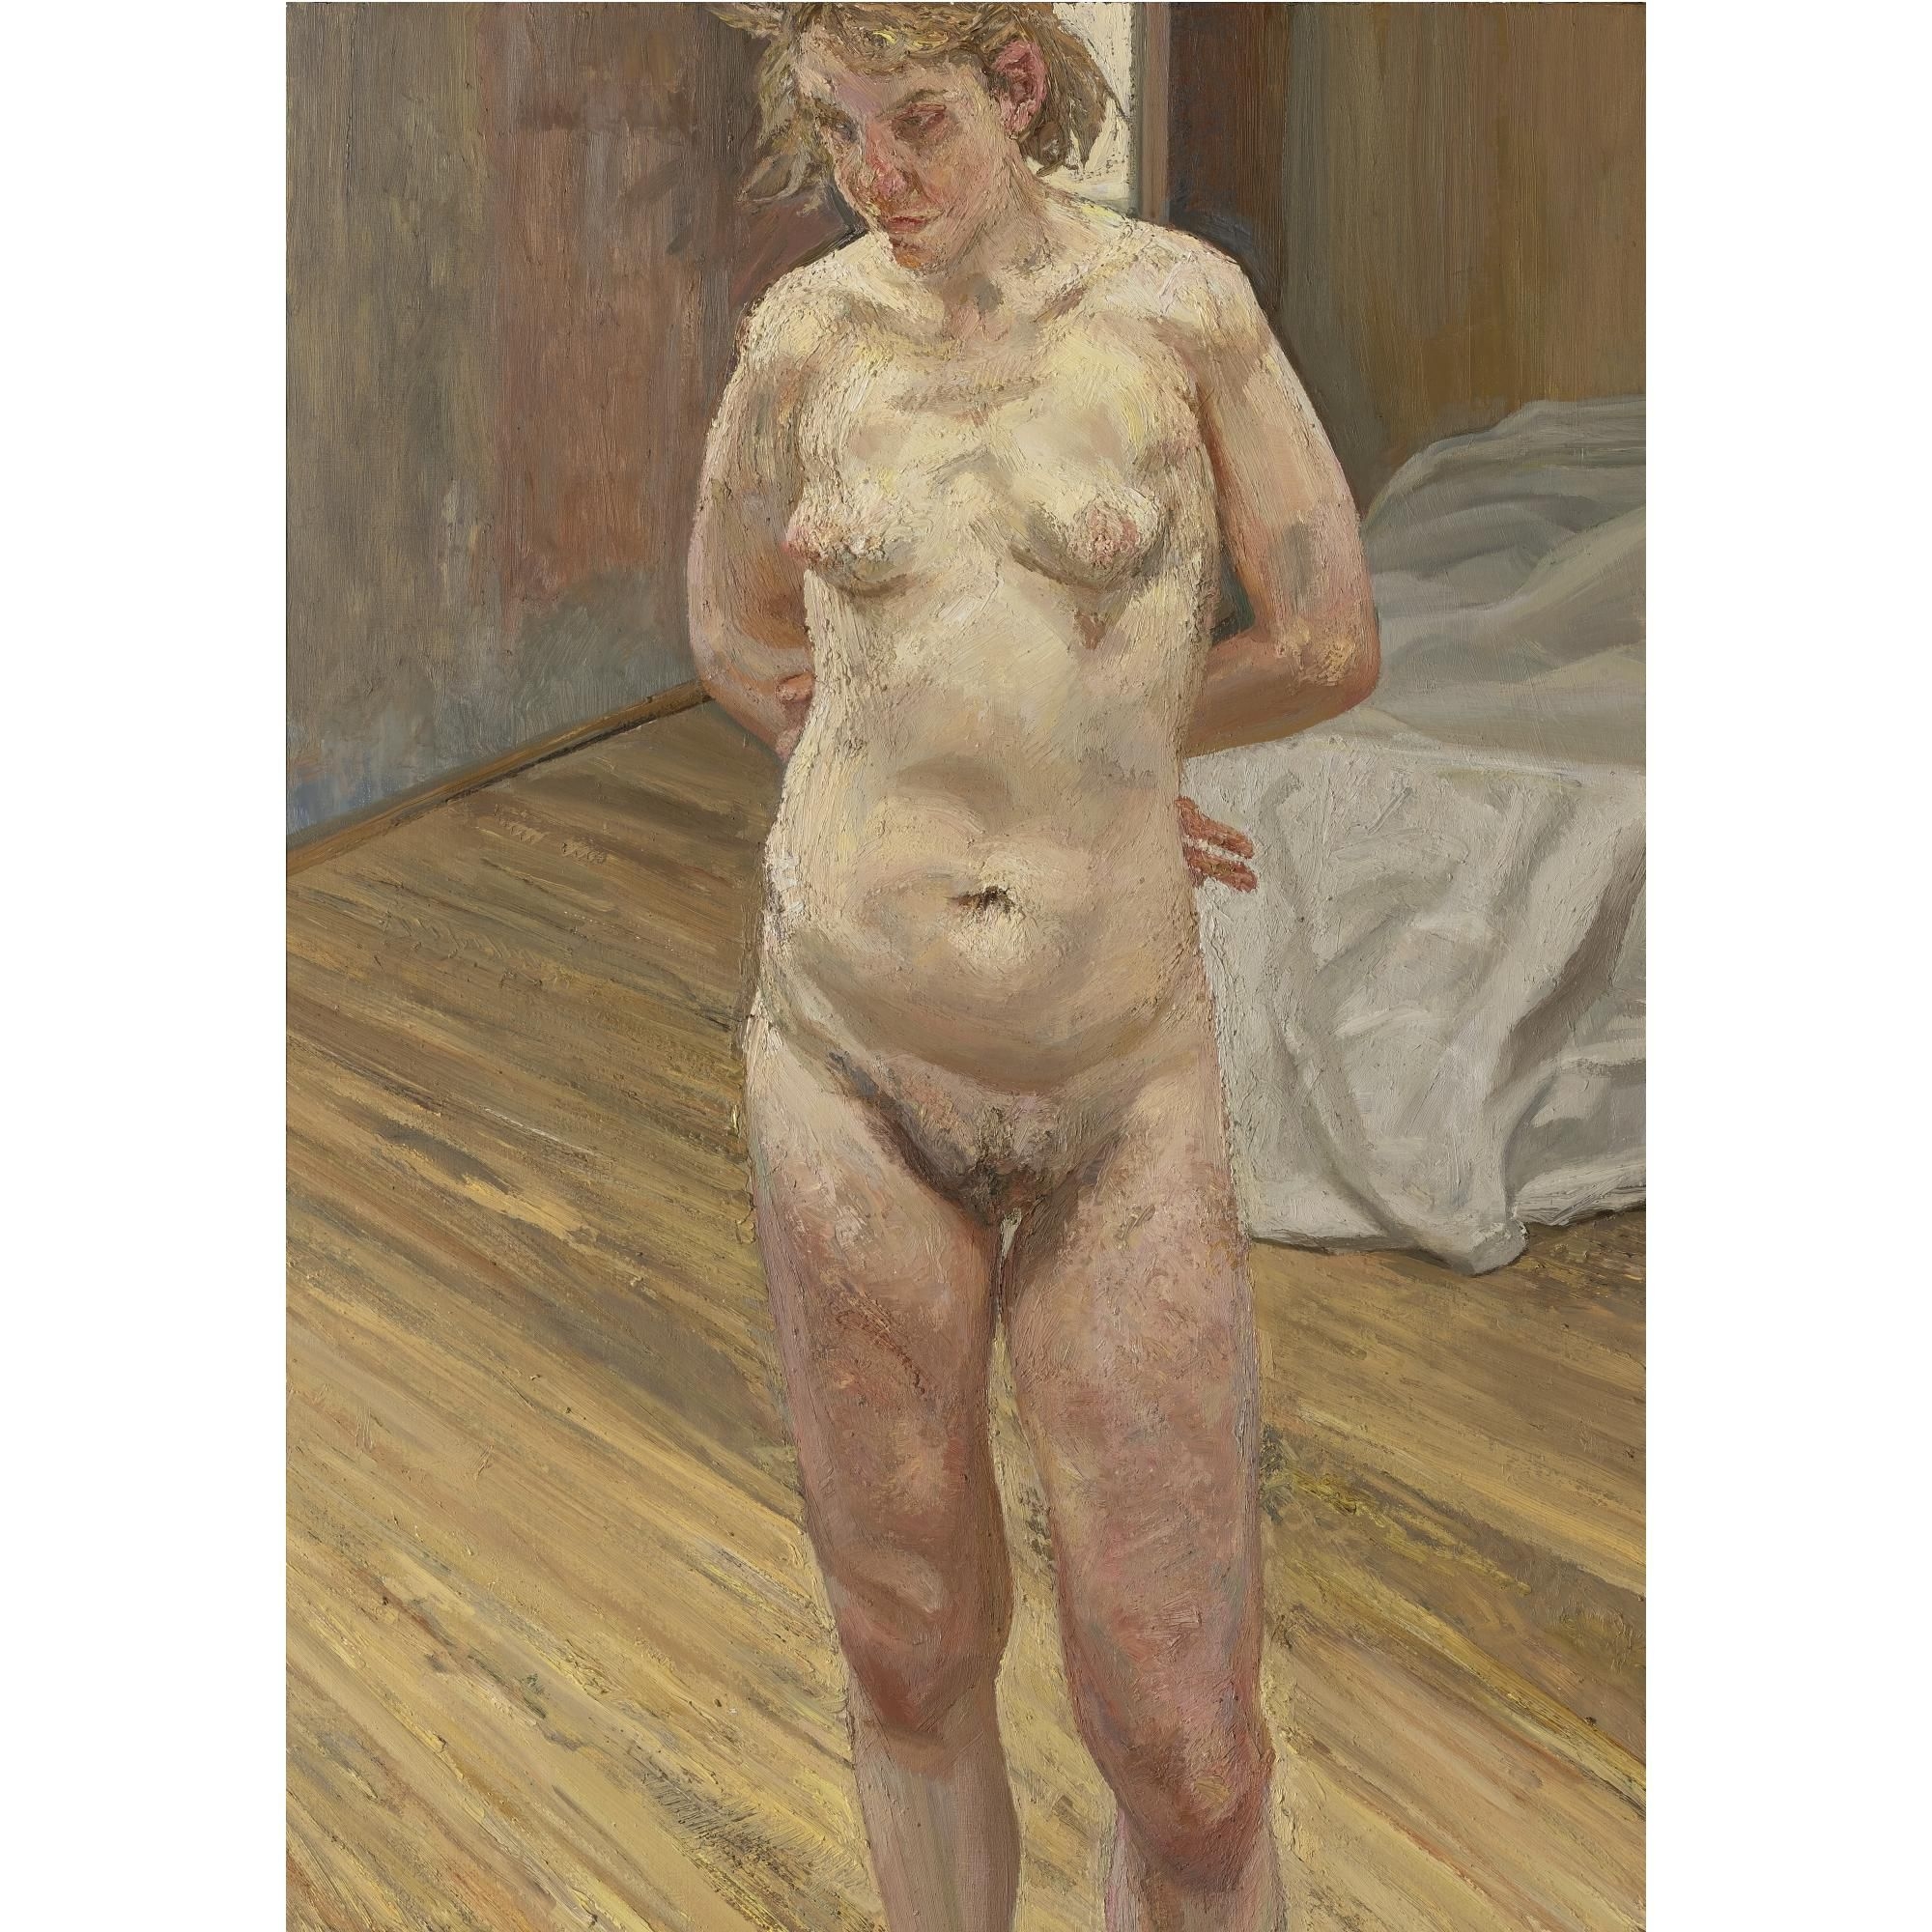 Naked Portrait Standing by Lucian Freud, FullFormat:,year,1999